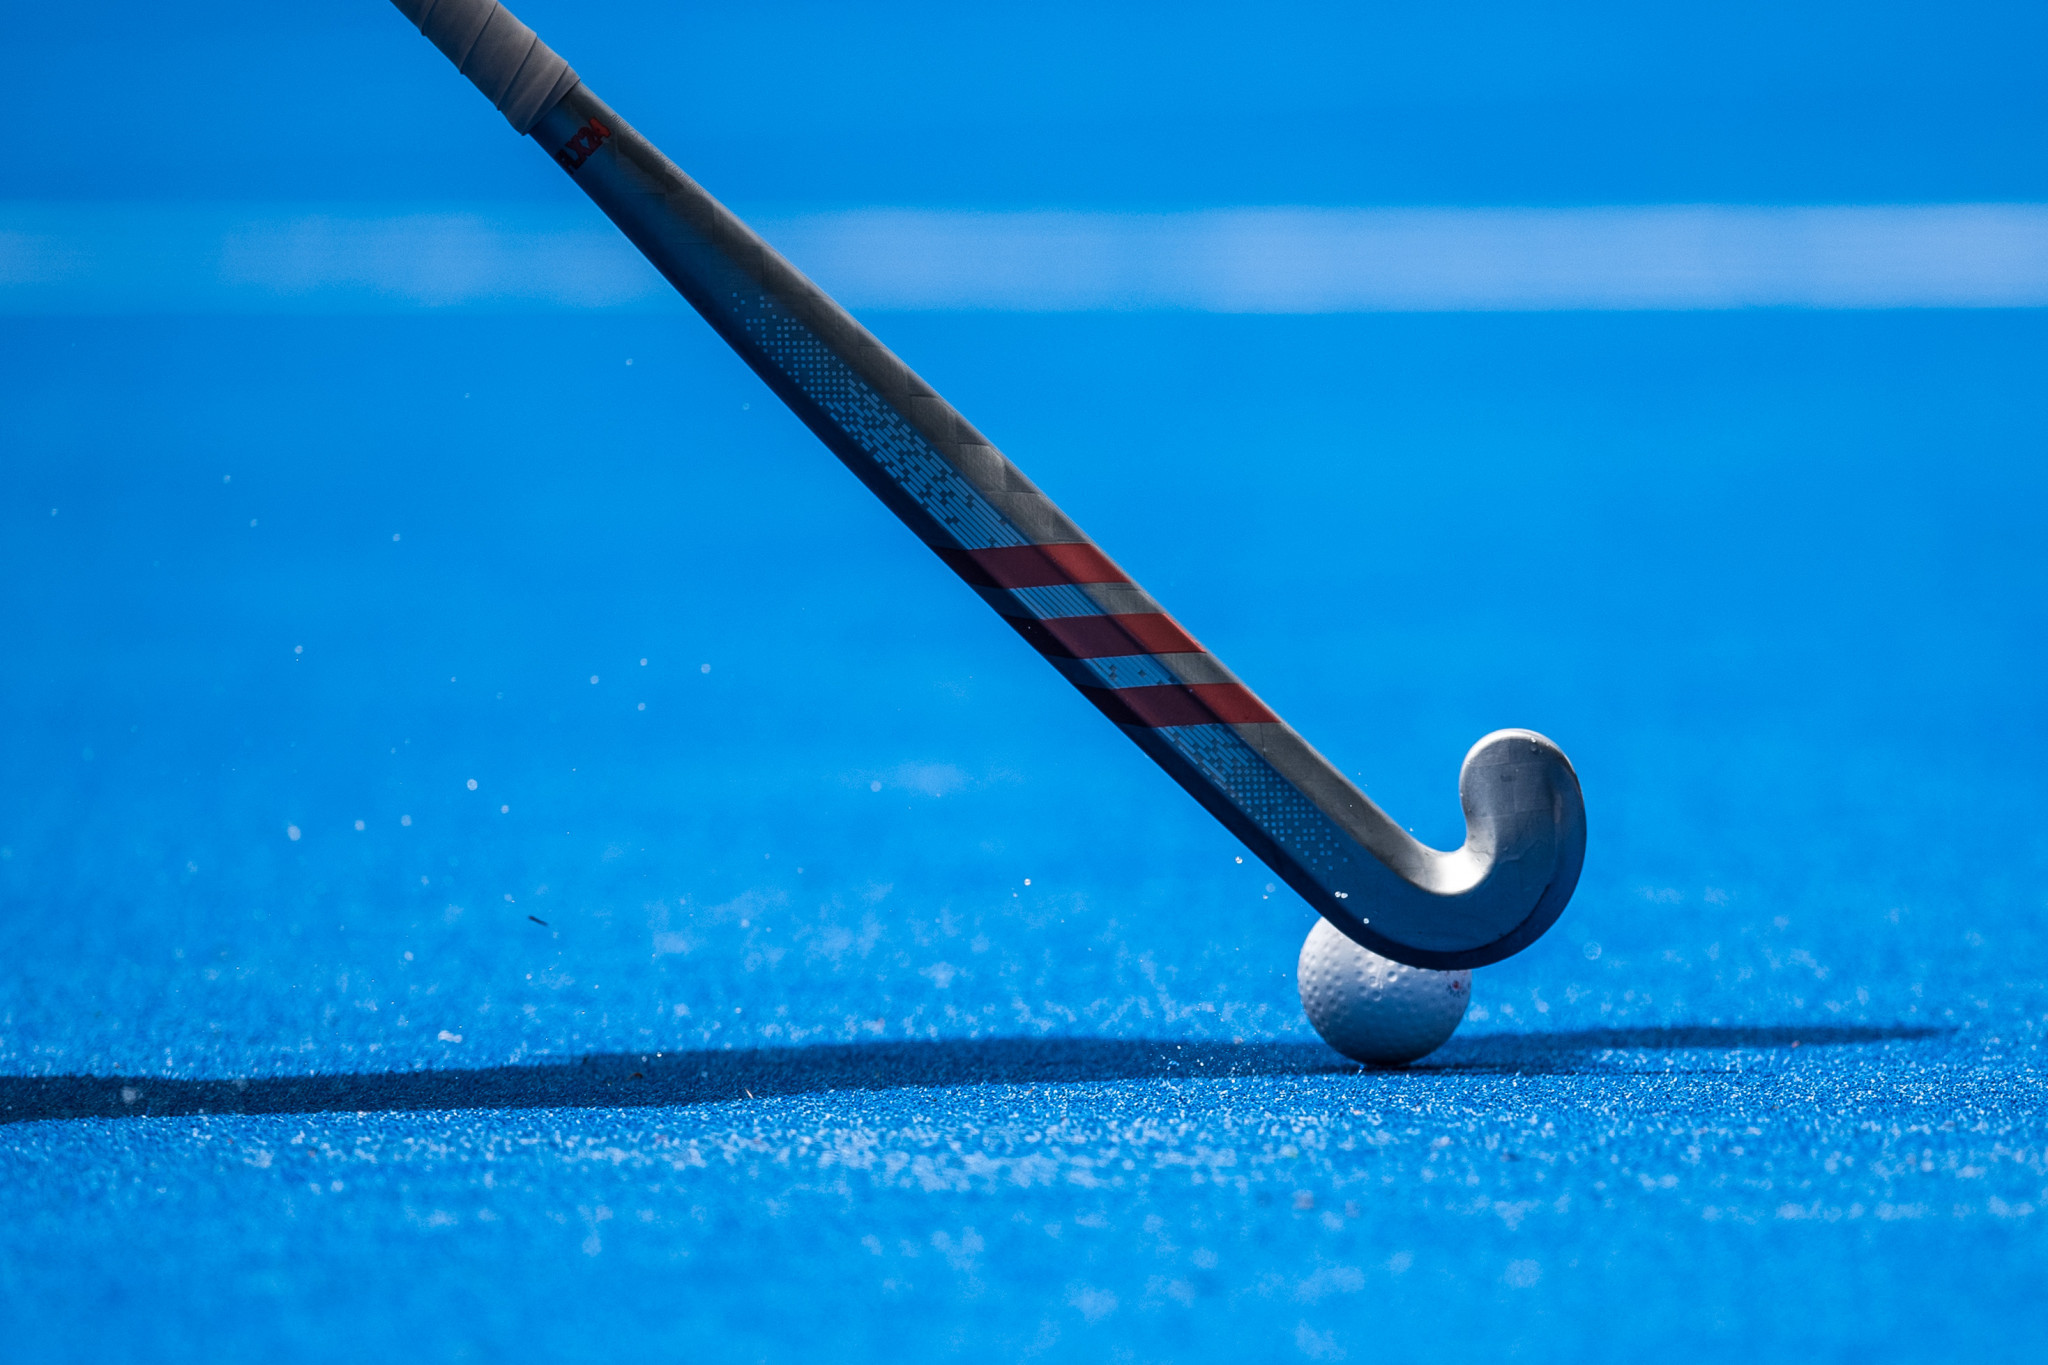 England and Spain progress to quarter-finals at Women's Hockey World Cup